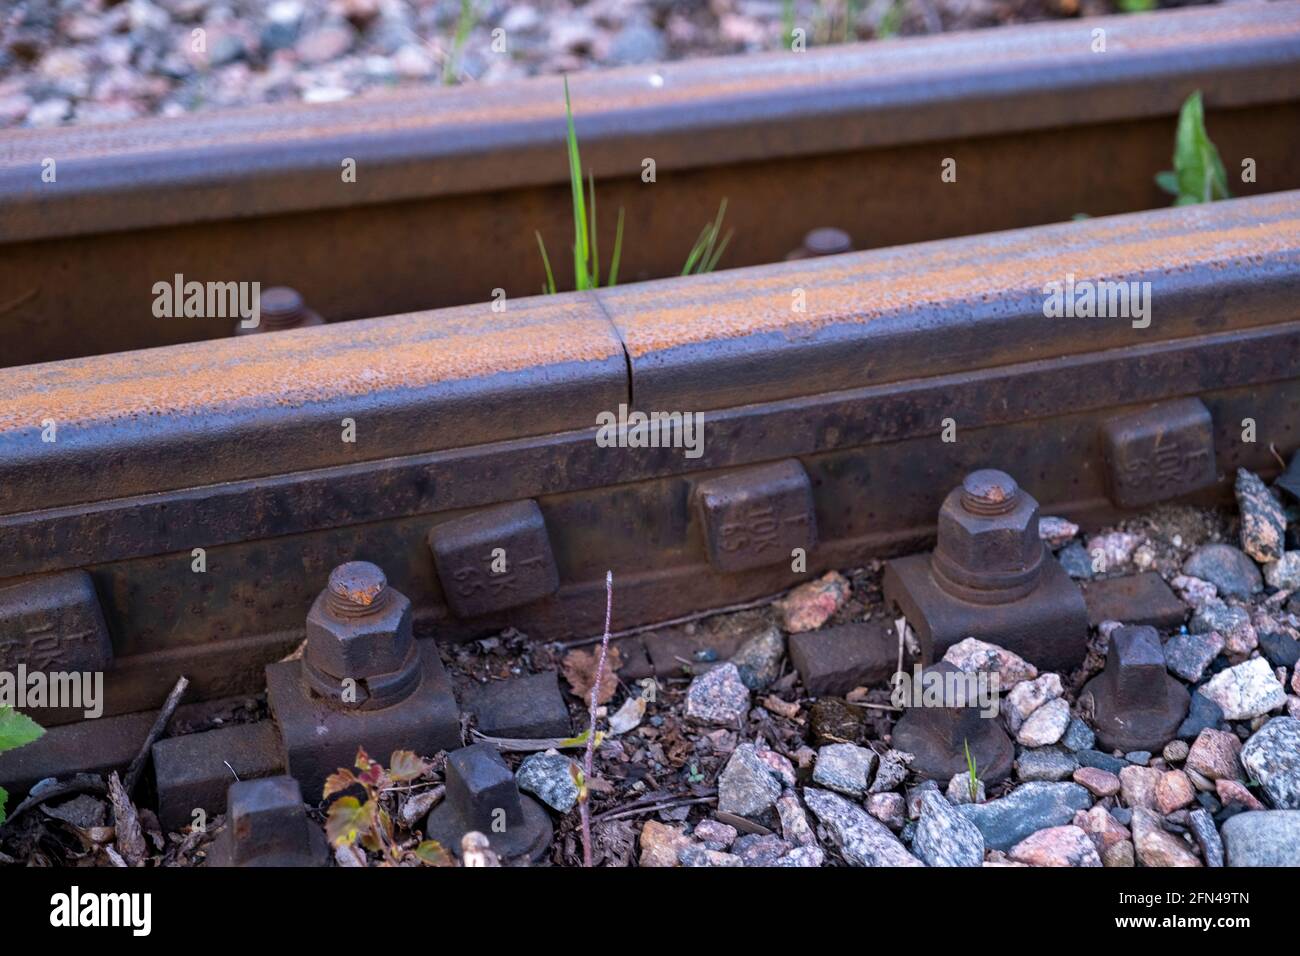 Helsinki / Finland - MAY 13, 2021: Closeup of a retro-style railway track with wooden sleepers. Stock Photo